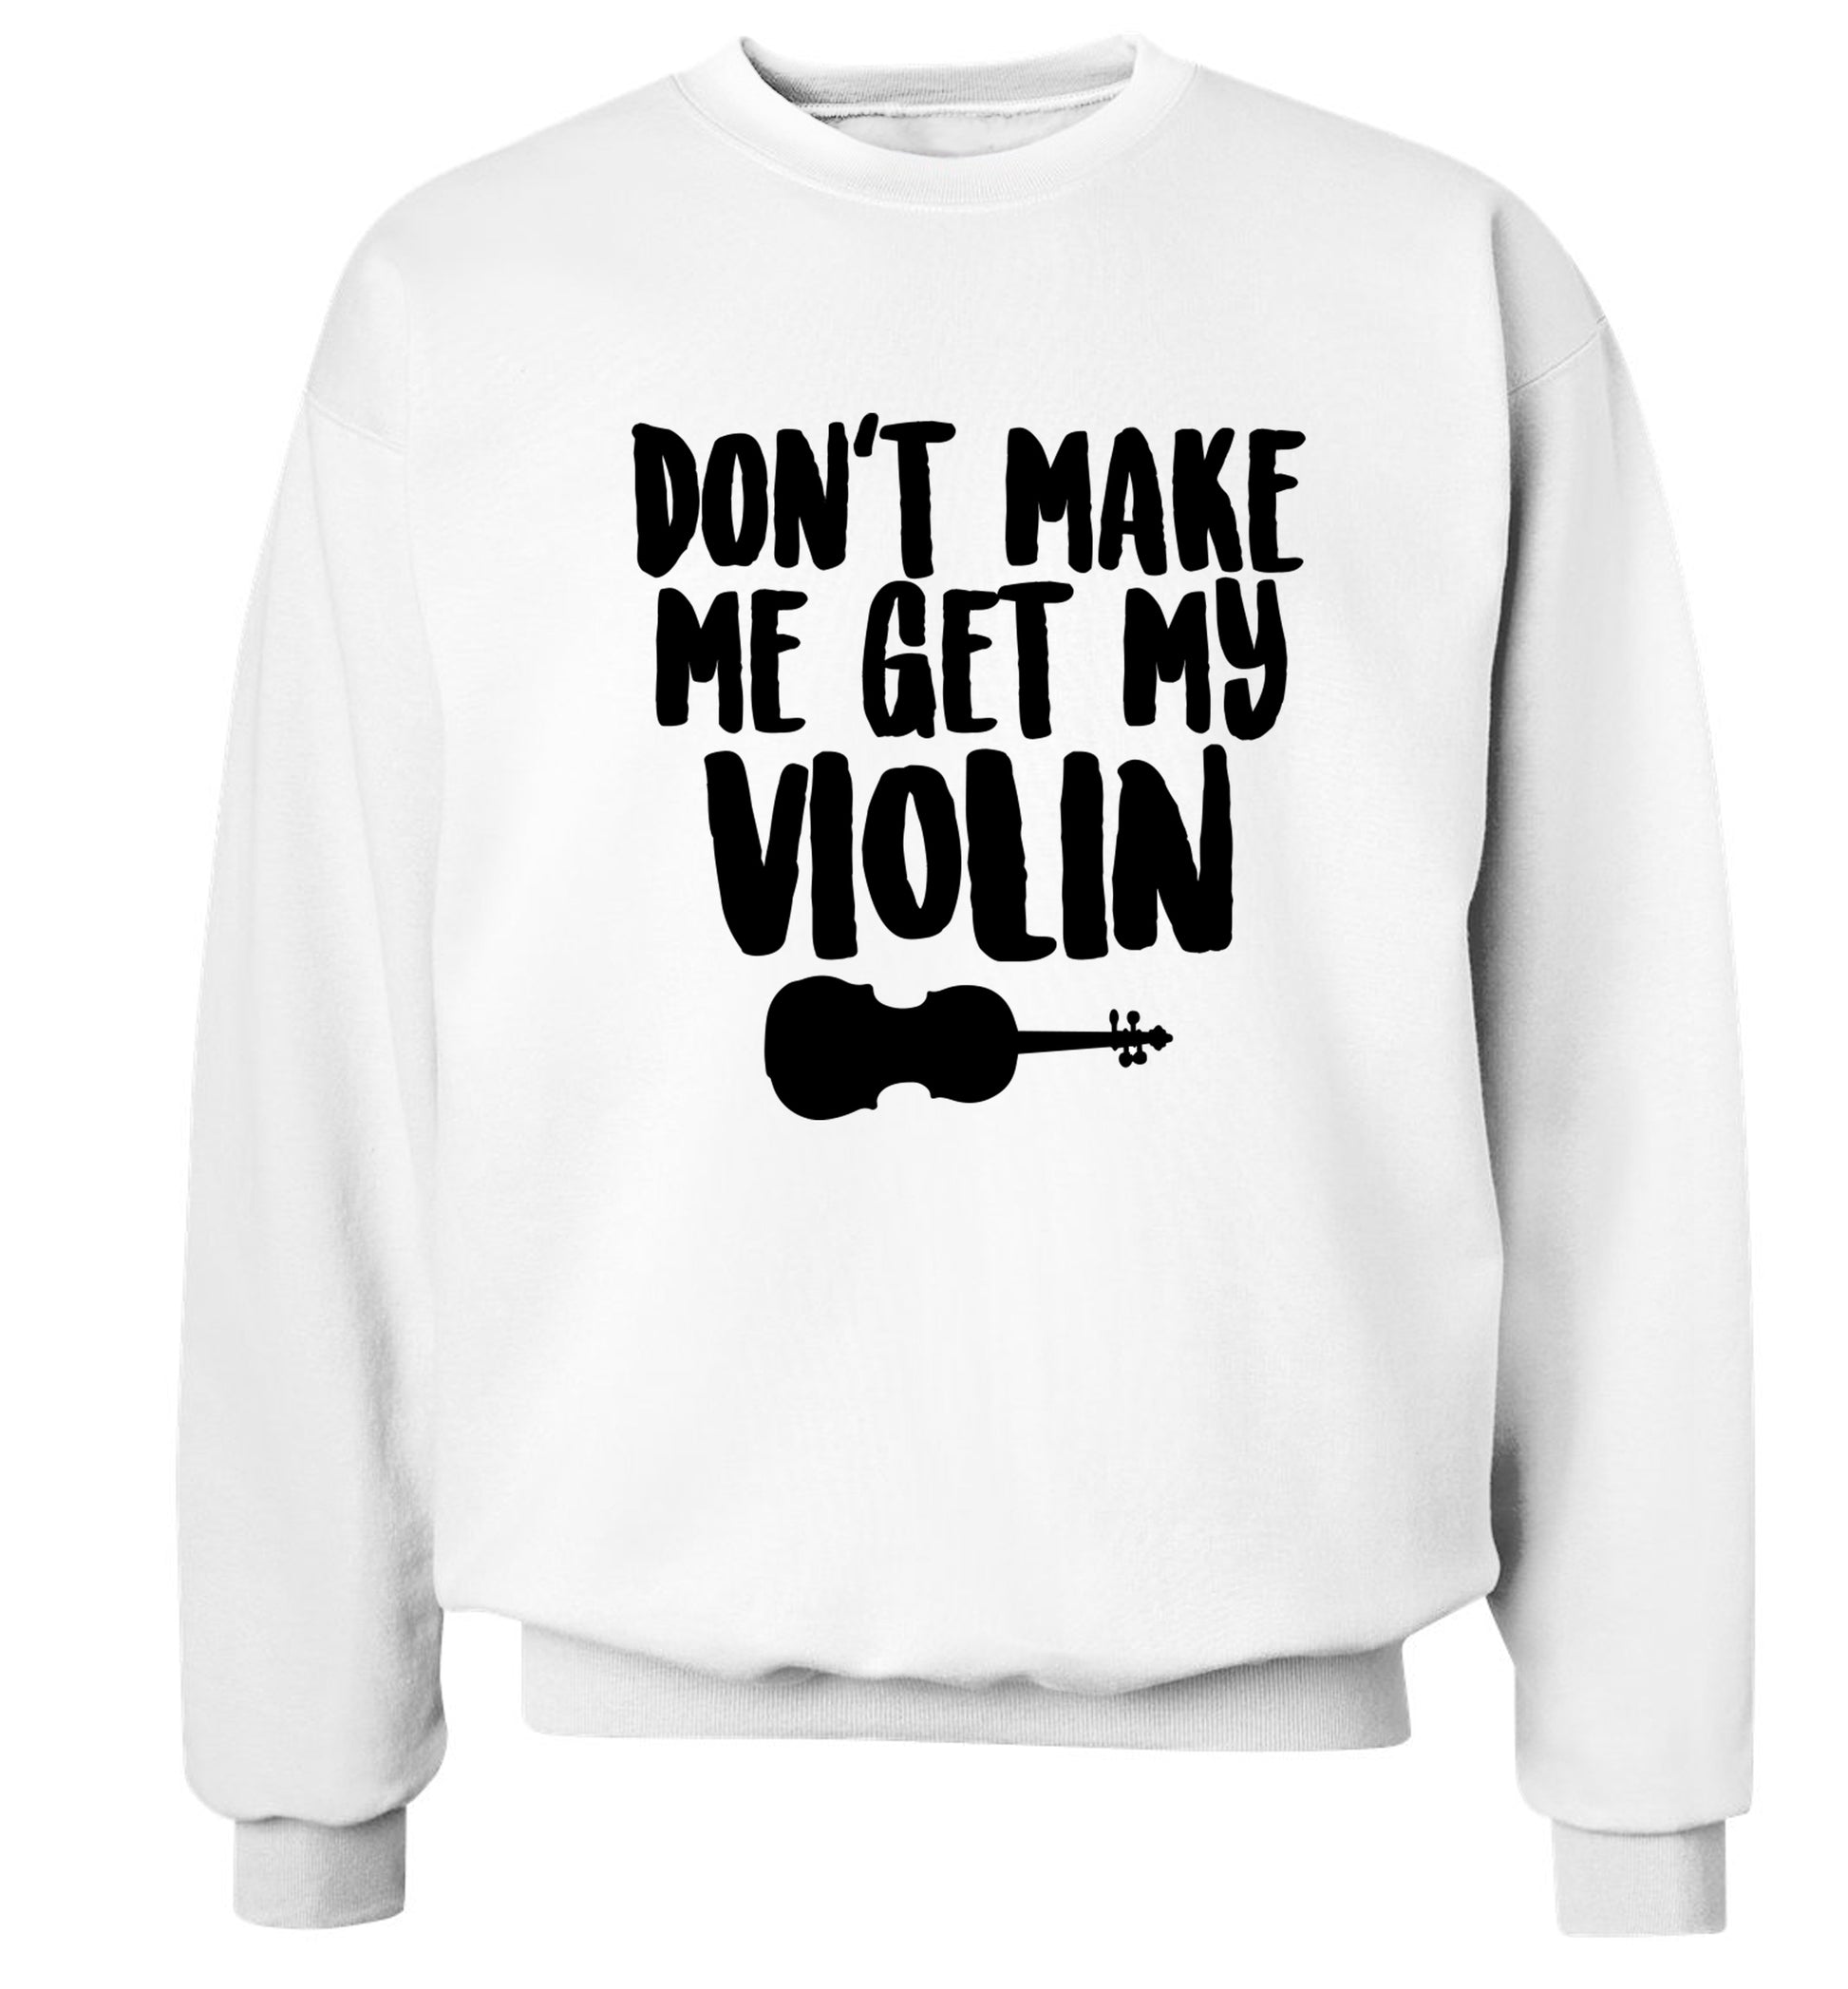 Don't make me get my violin Adult's unisex white Sweater 2XL